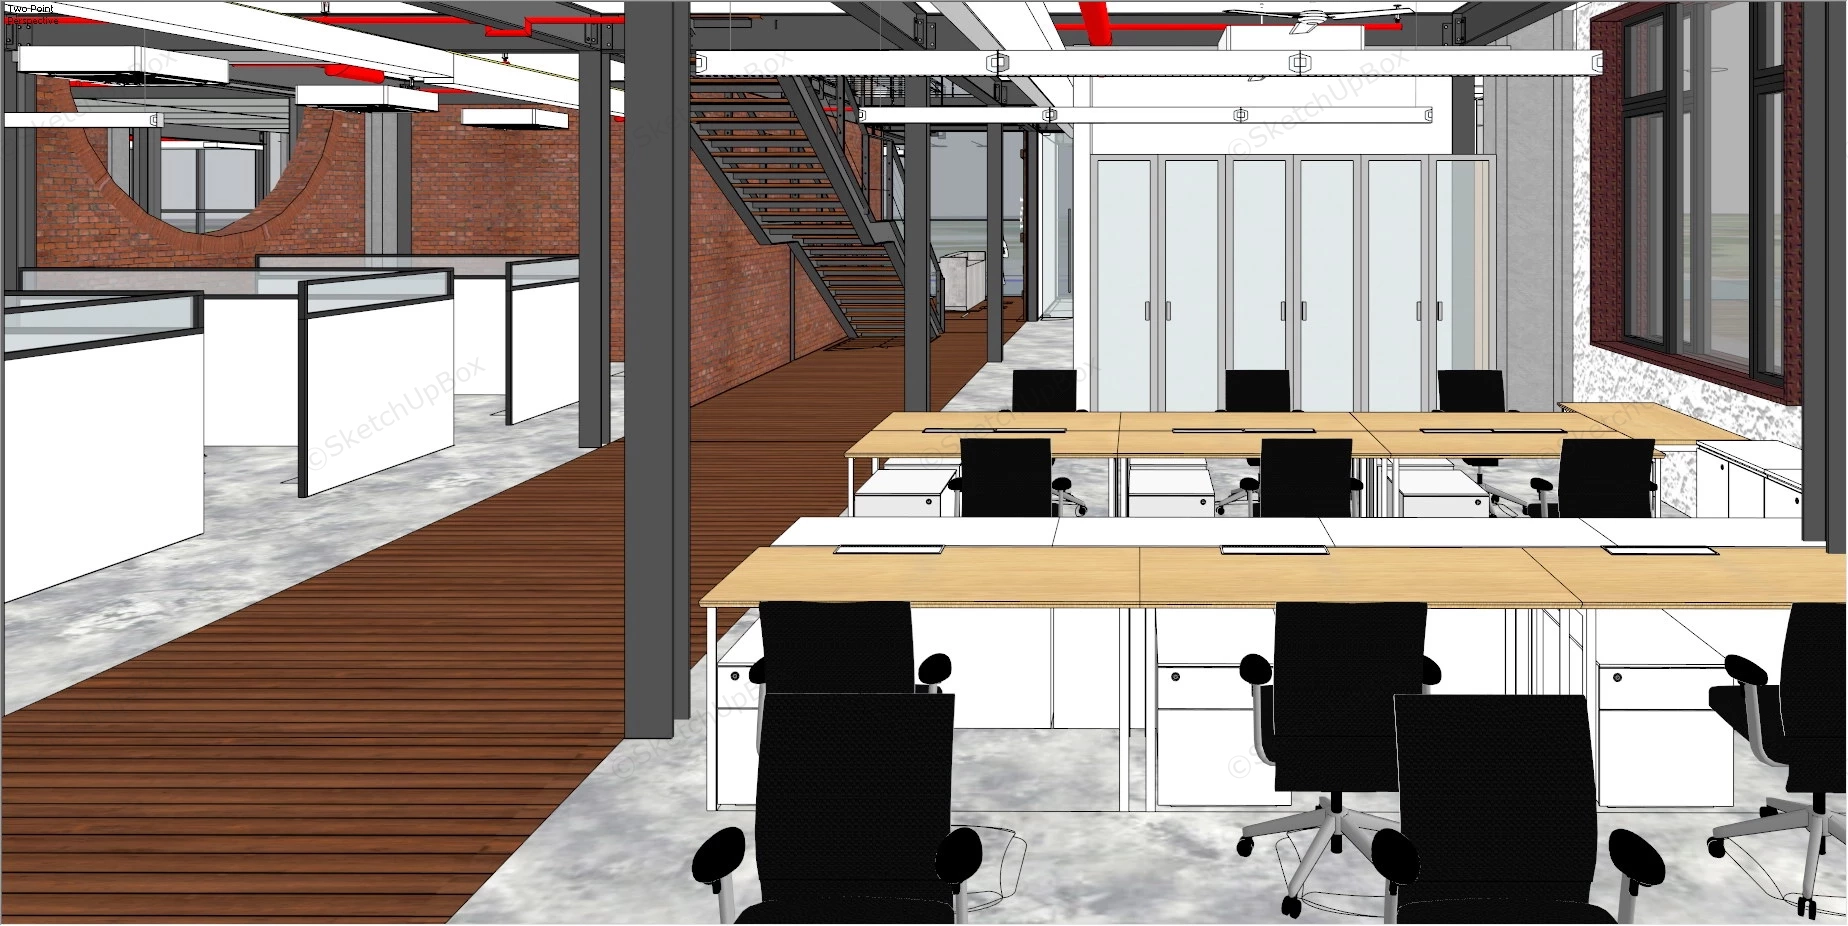 Industrial Style Office Design sketchup model preview - SketchupBox